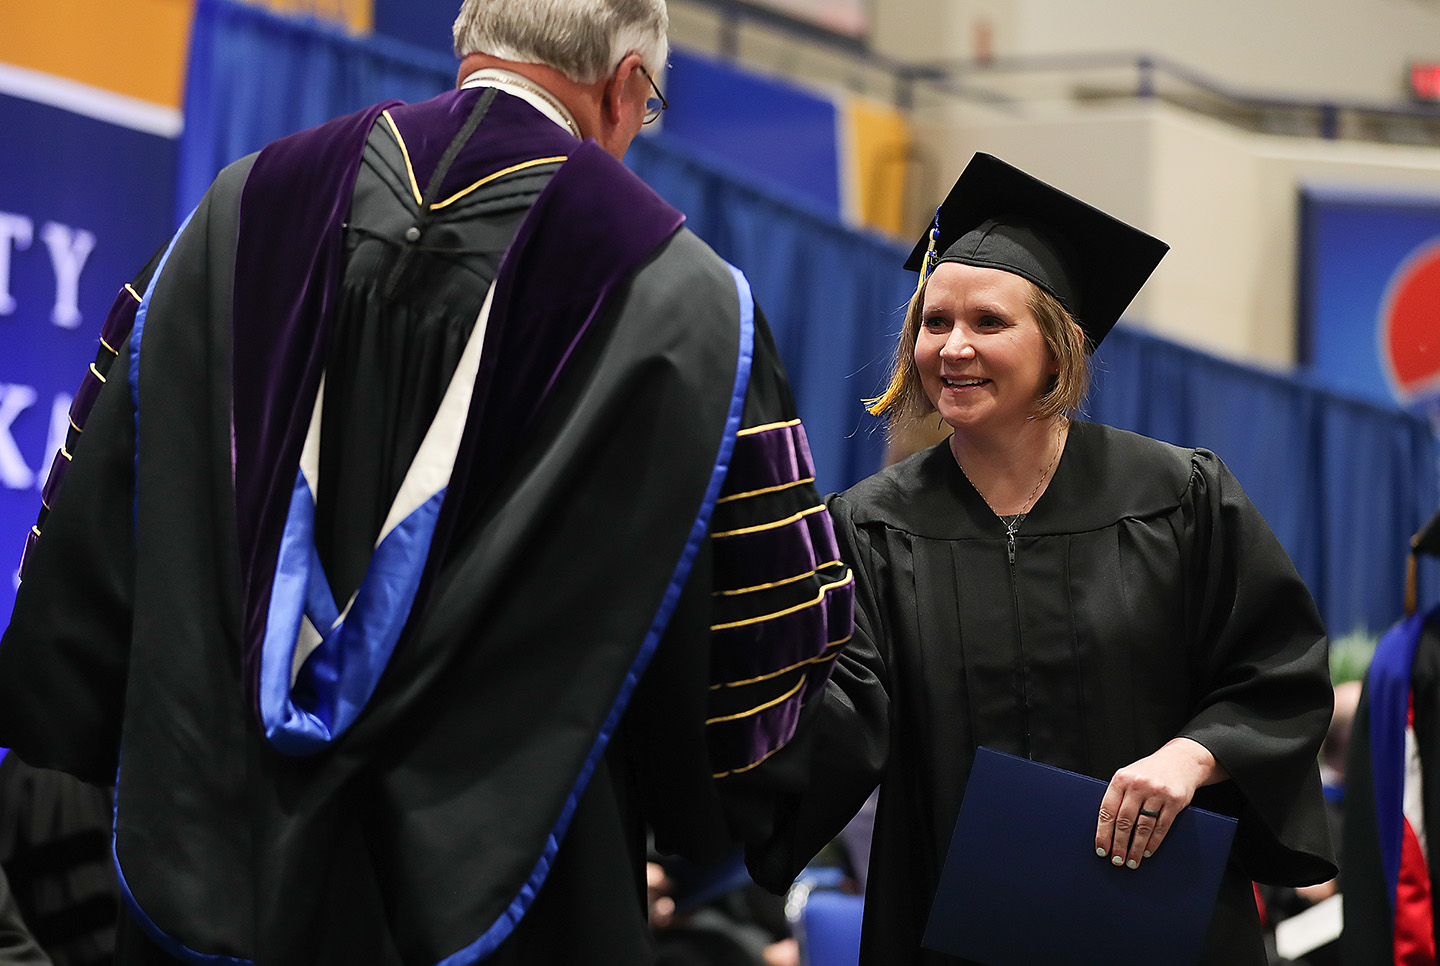 Kimberley Orcutt receives her bachelor’s degree from UNK Chancellor Doug Kristensen during Friday’s winter commencement ceremony. Orcutt started taking classes nine years ago while continuing to work full time at UNK. (Photos by Erika Pritchard, UNK Communications)